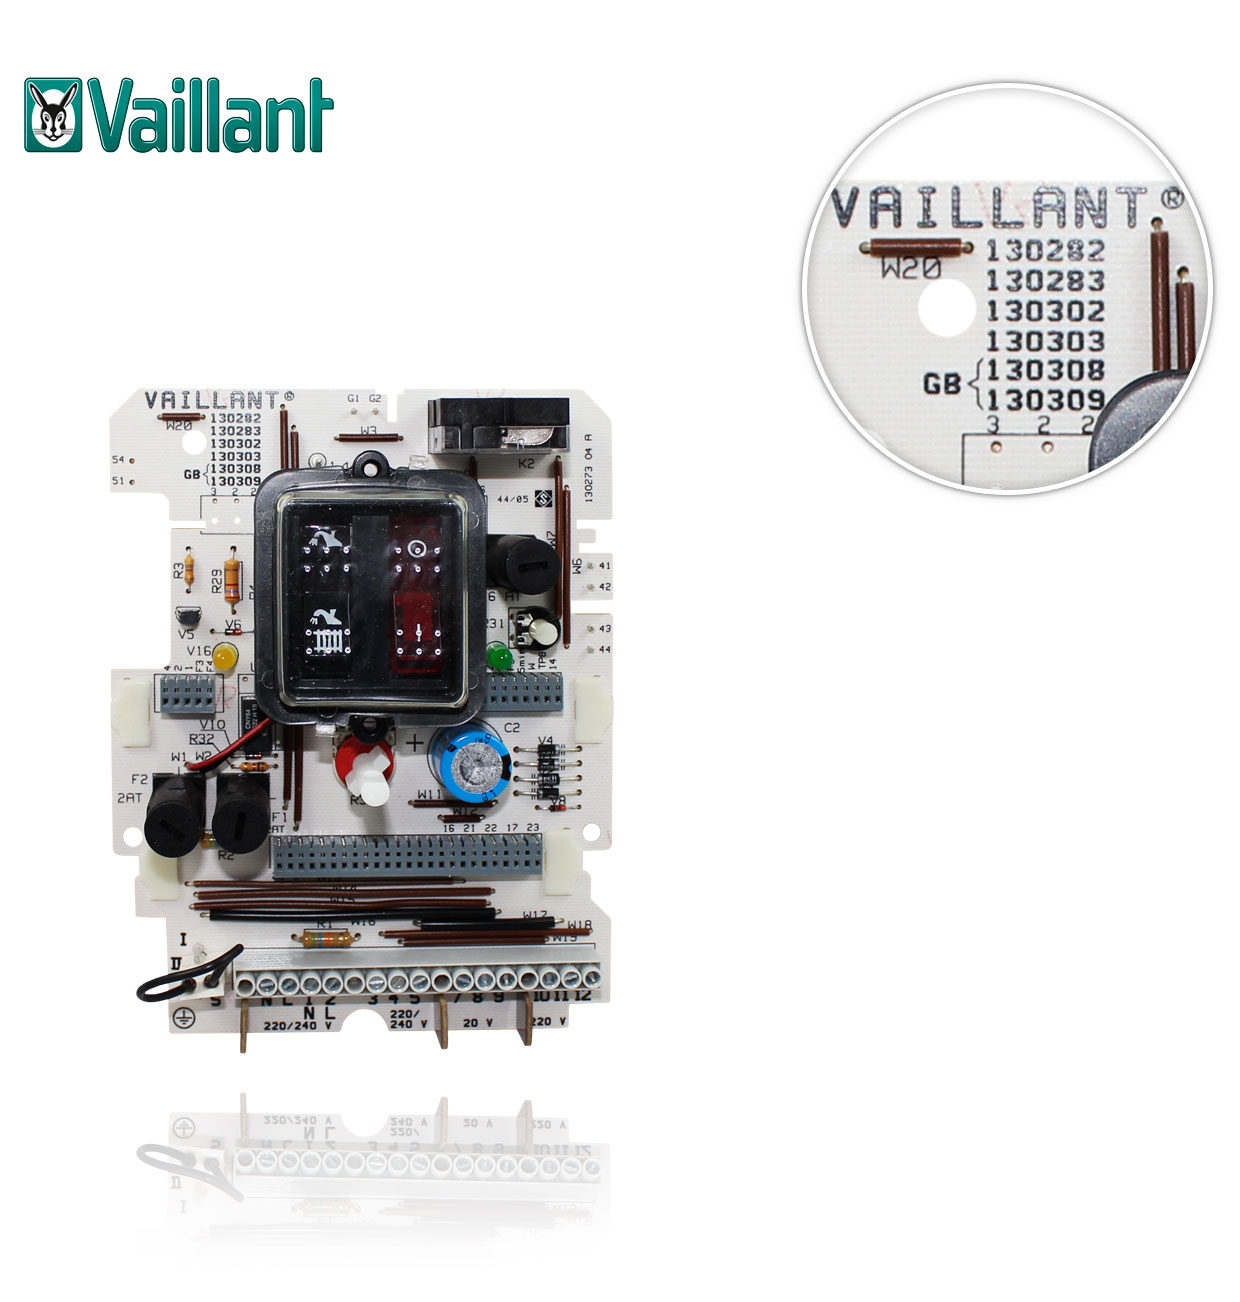 PULSING ELECTRONIC PANEL FOR VCW 24-10, (HYBRID) VAILLANT 130324